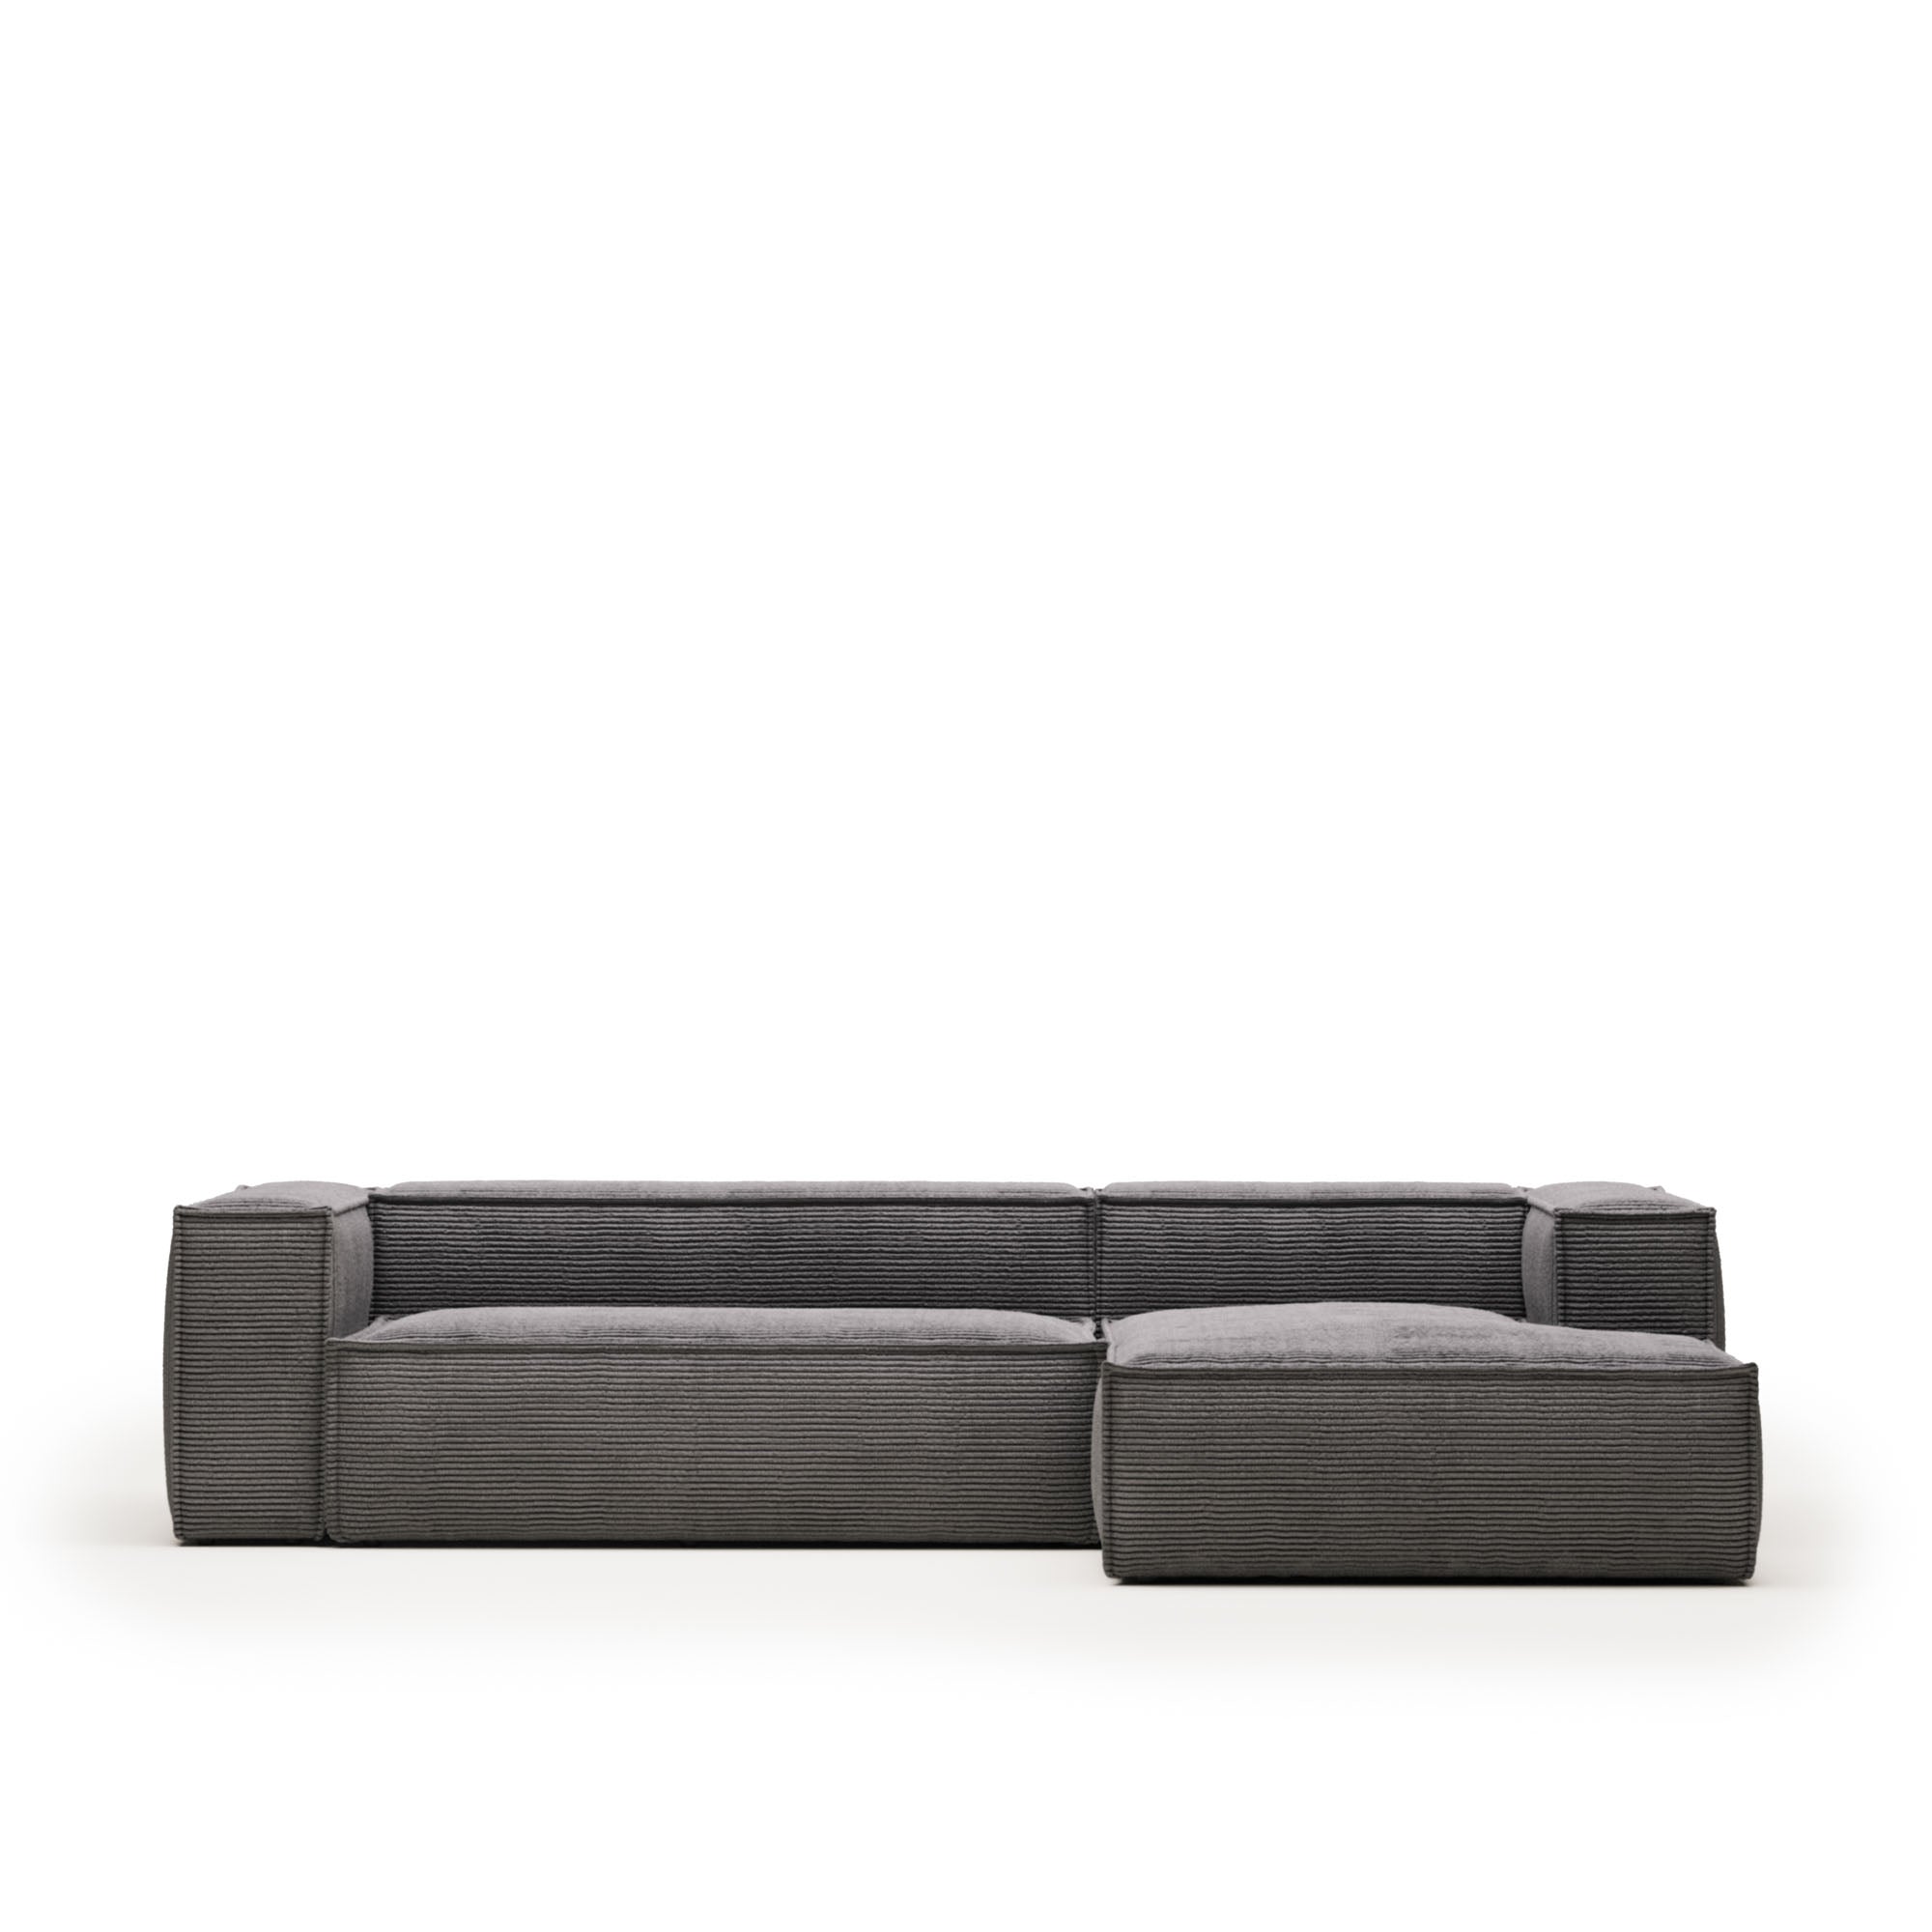 Blok 3-seater sofa with recliner on the right, in gray corduroy, 300 cm